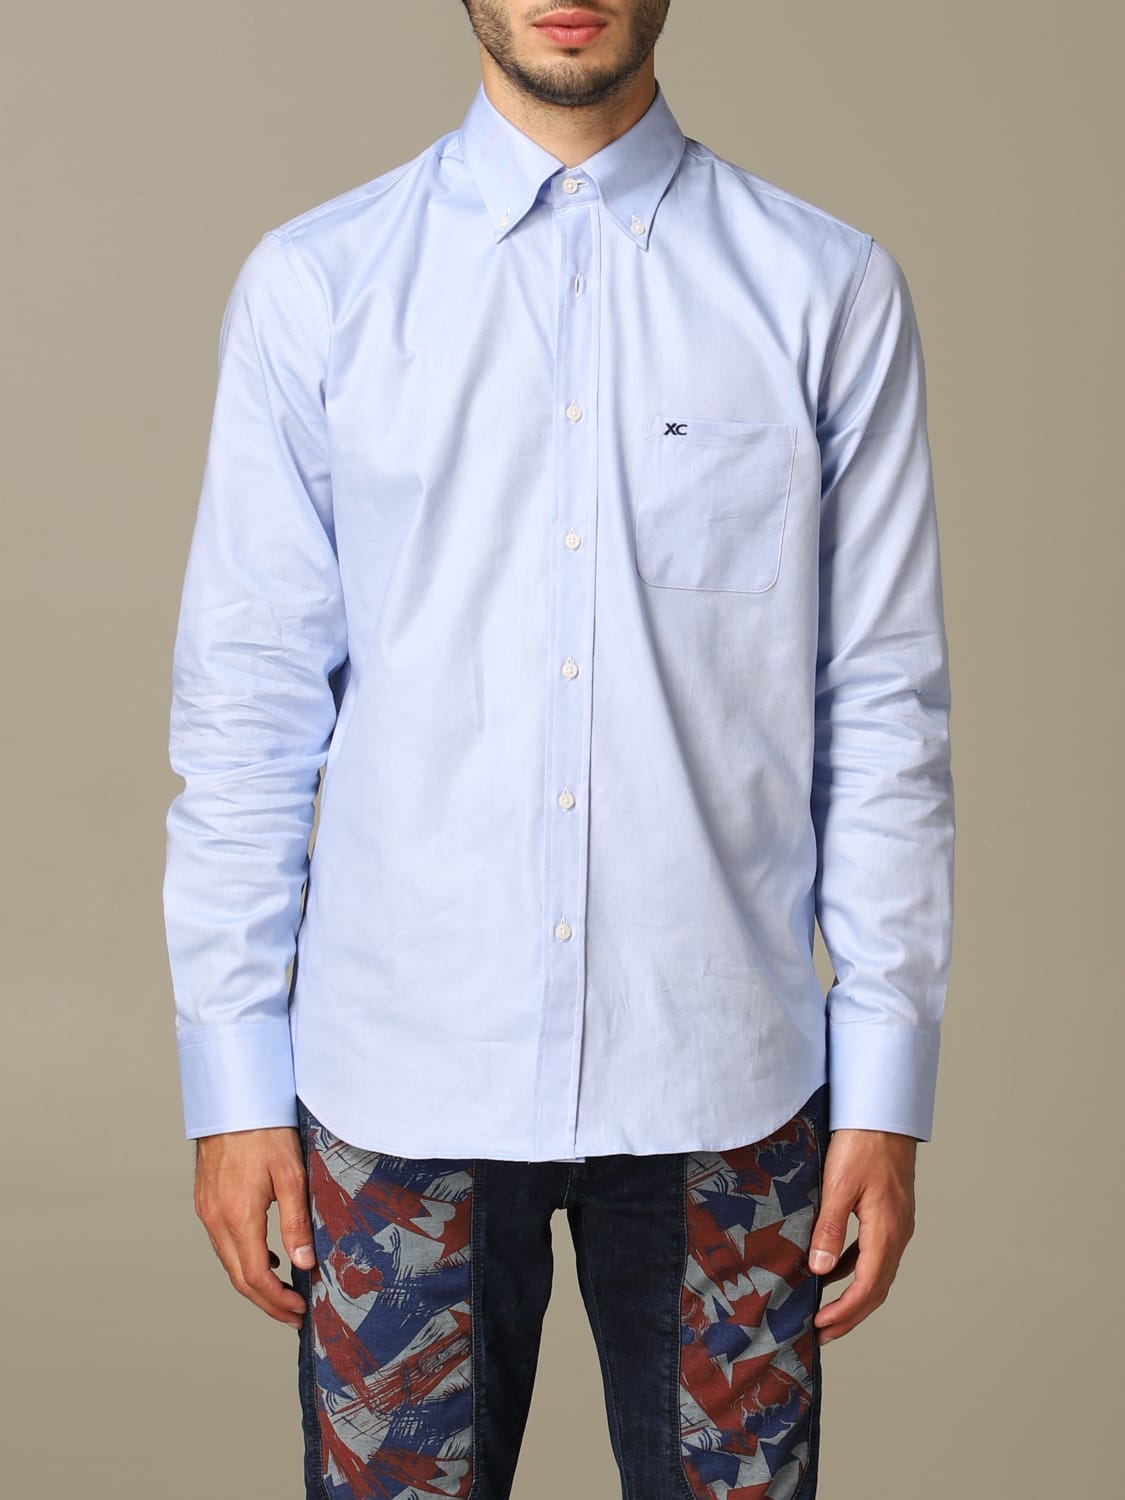 Xc -  regular fit shirt with button-down collar